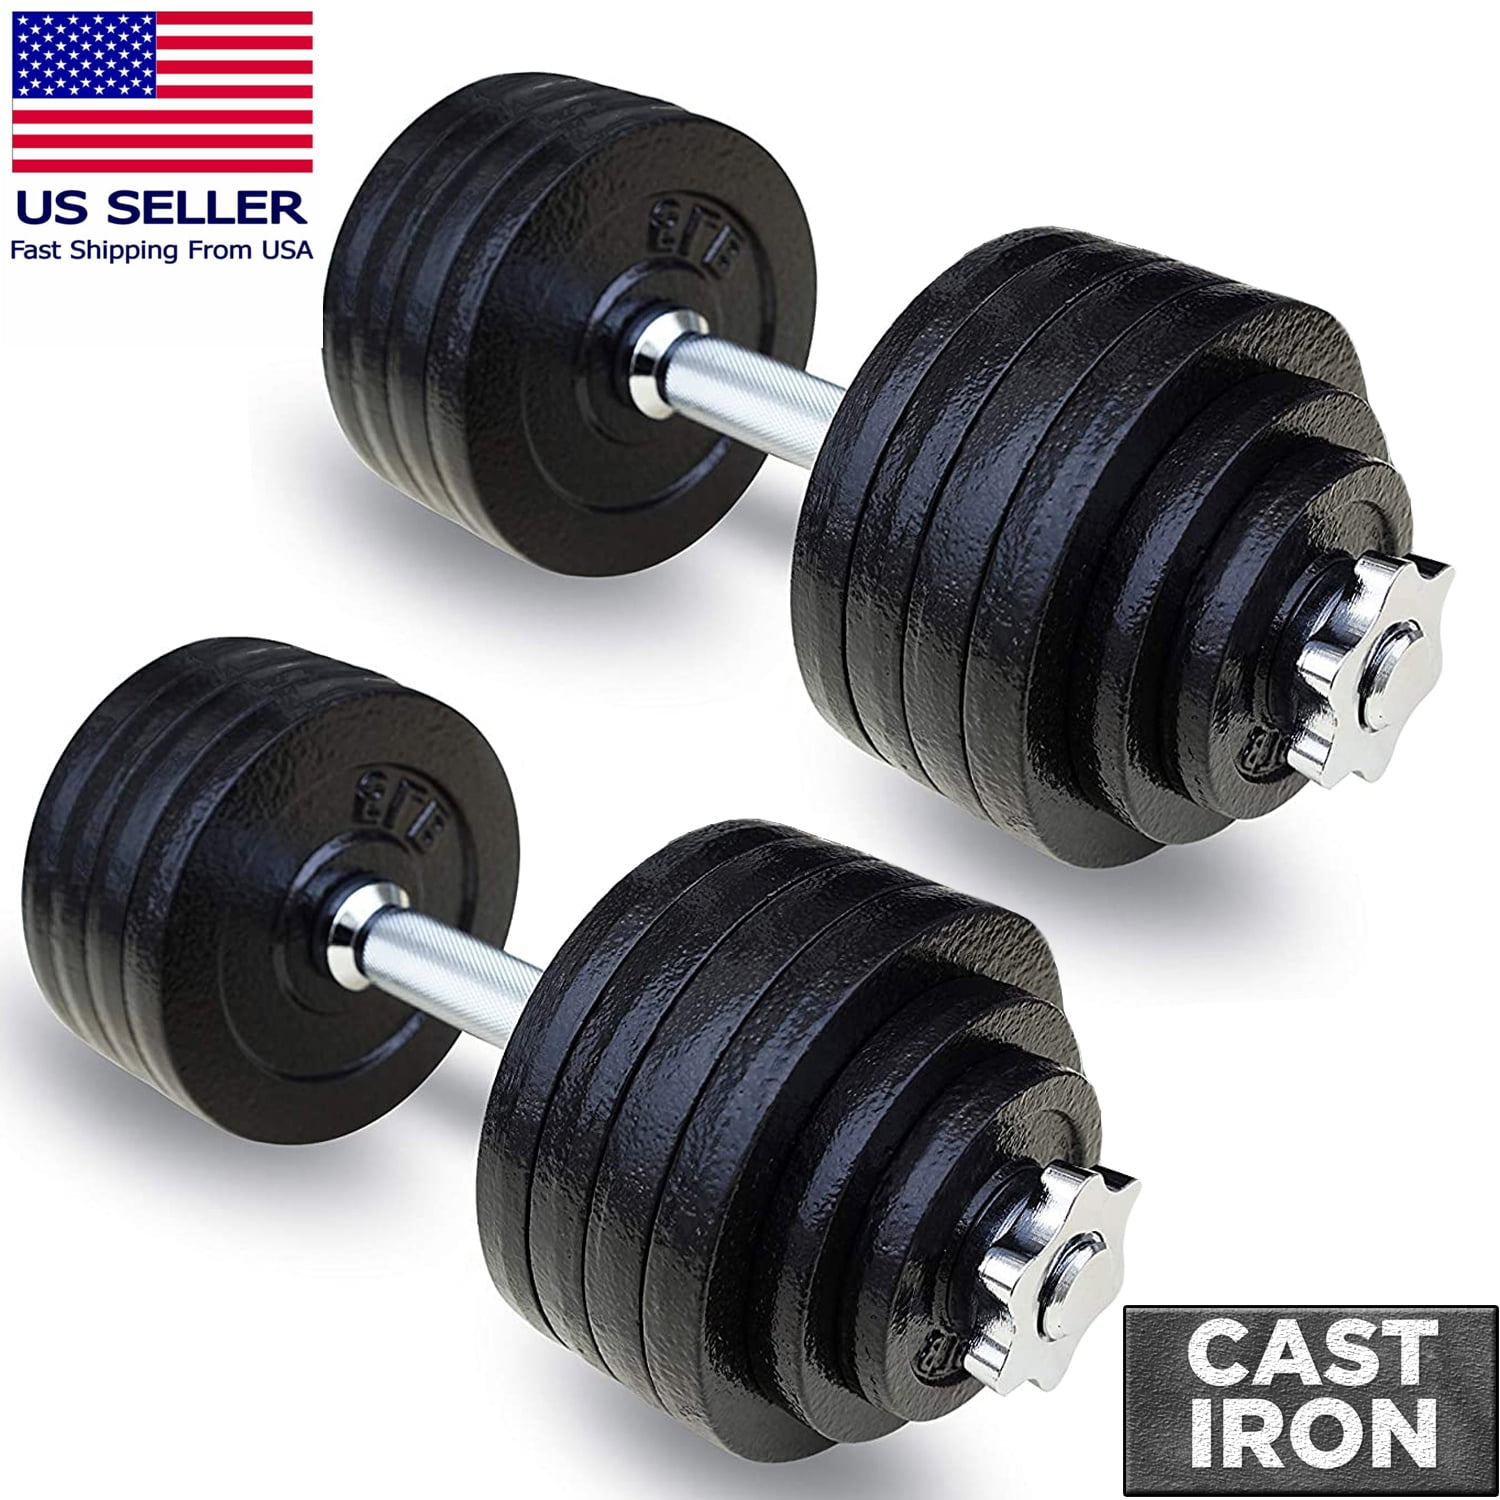 Yes4All 100 lb Adjustable Dumbbell Weight Set & Connector *FREE PRIORITY SHIP* 